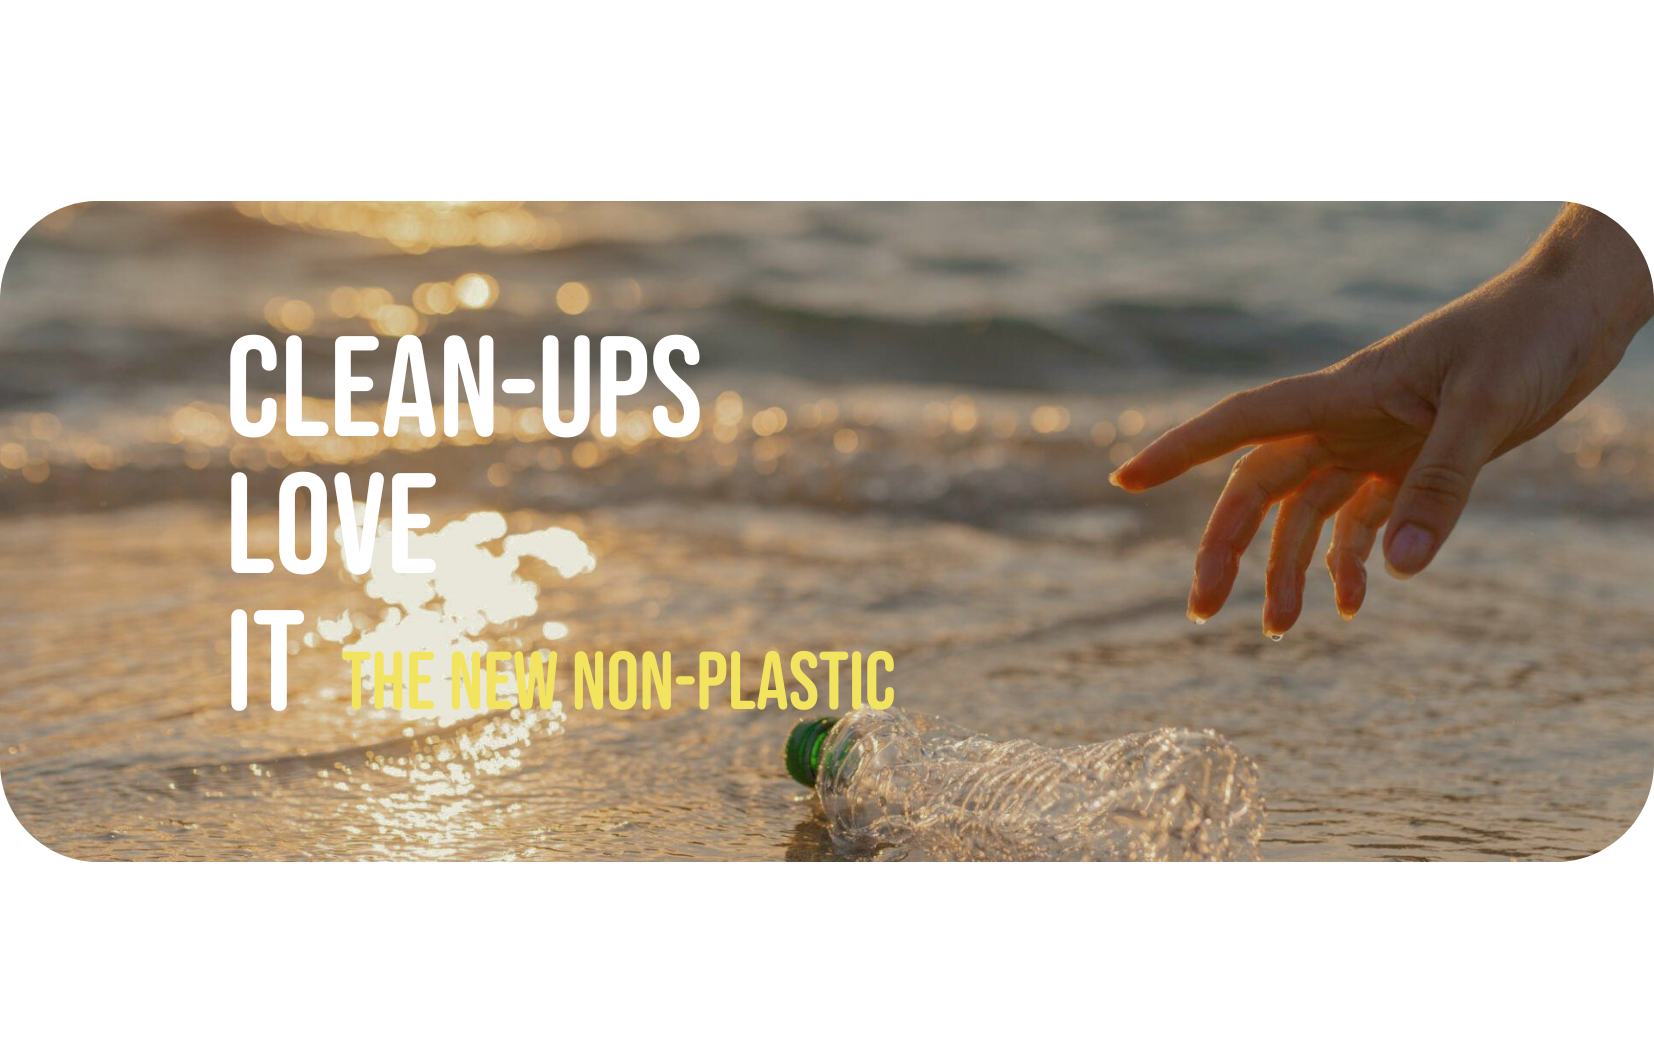 Cyclups' Commitment to Giving Back: Partnering with The Ocean Cleanup